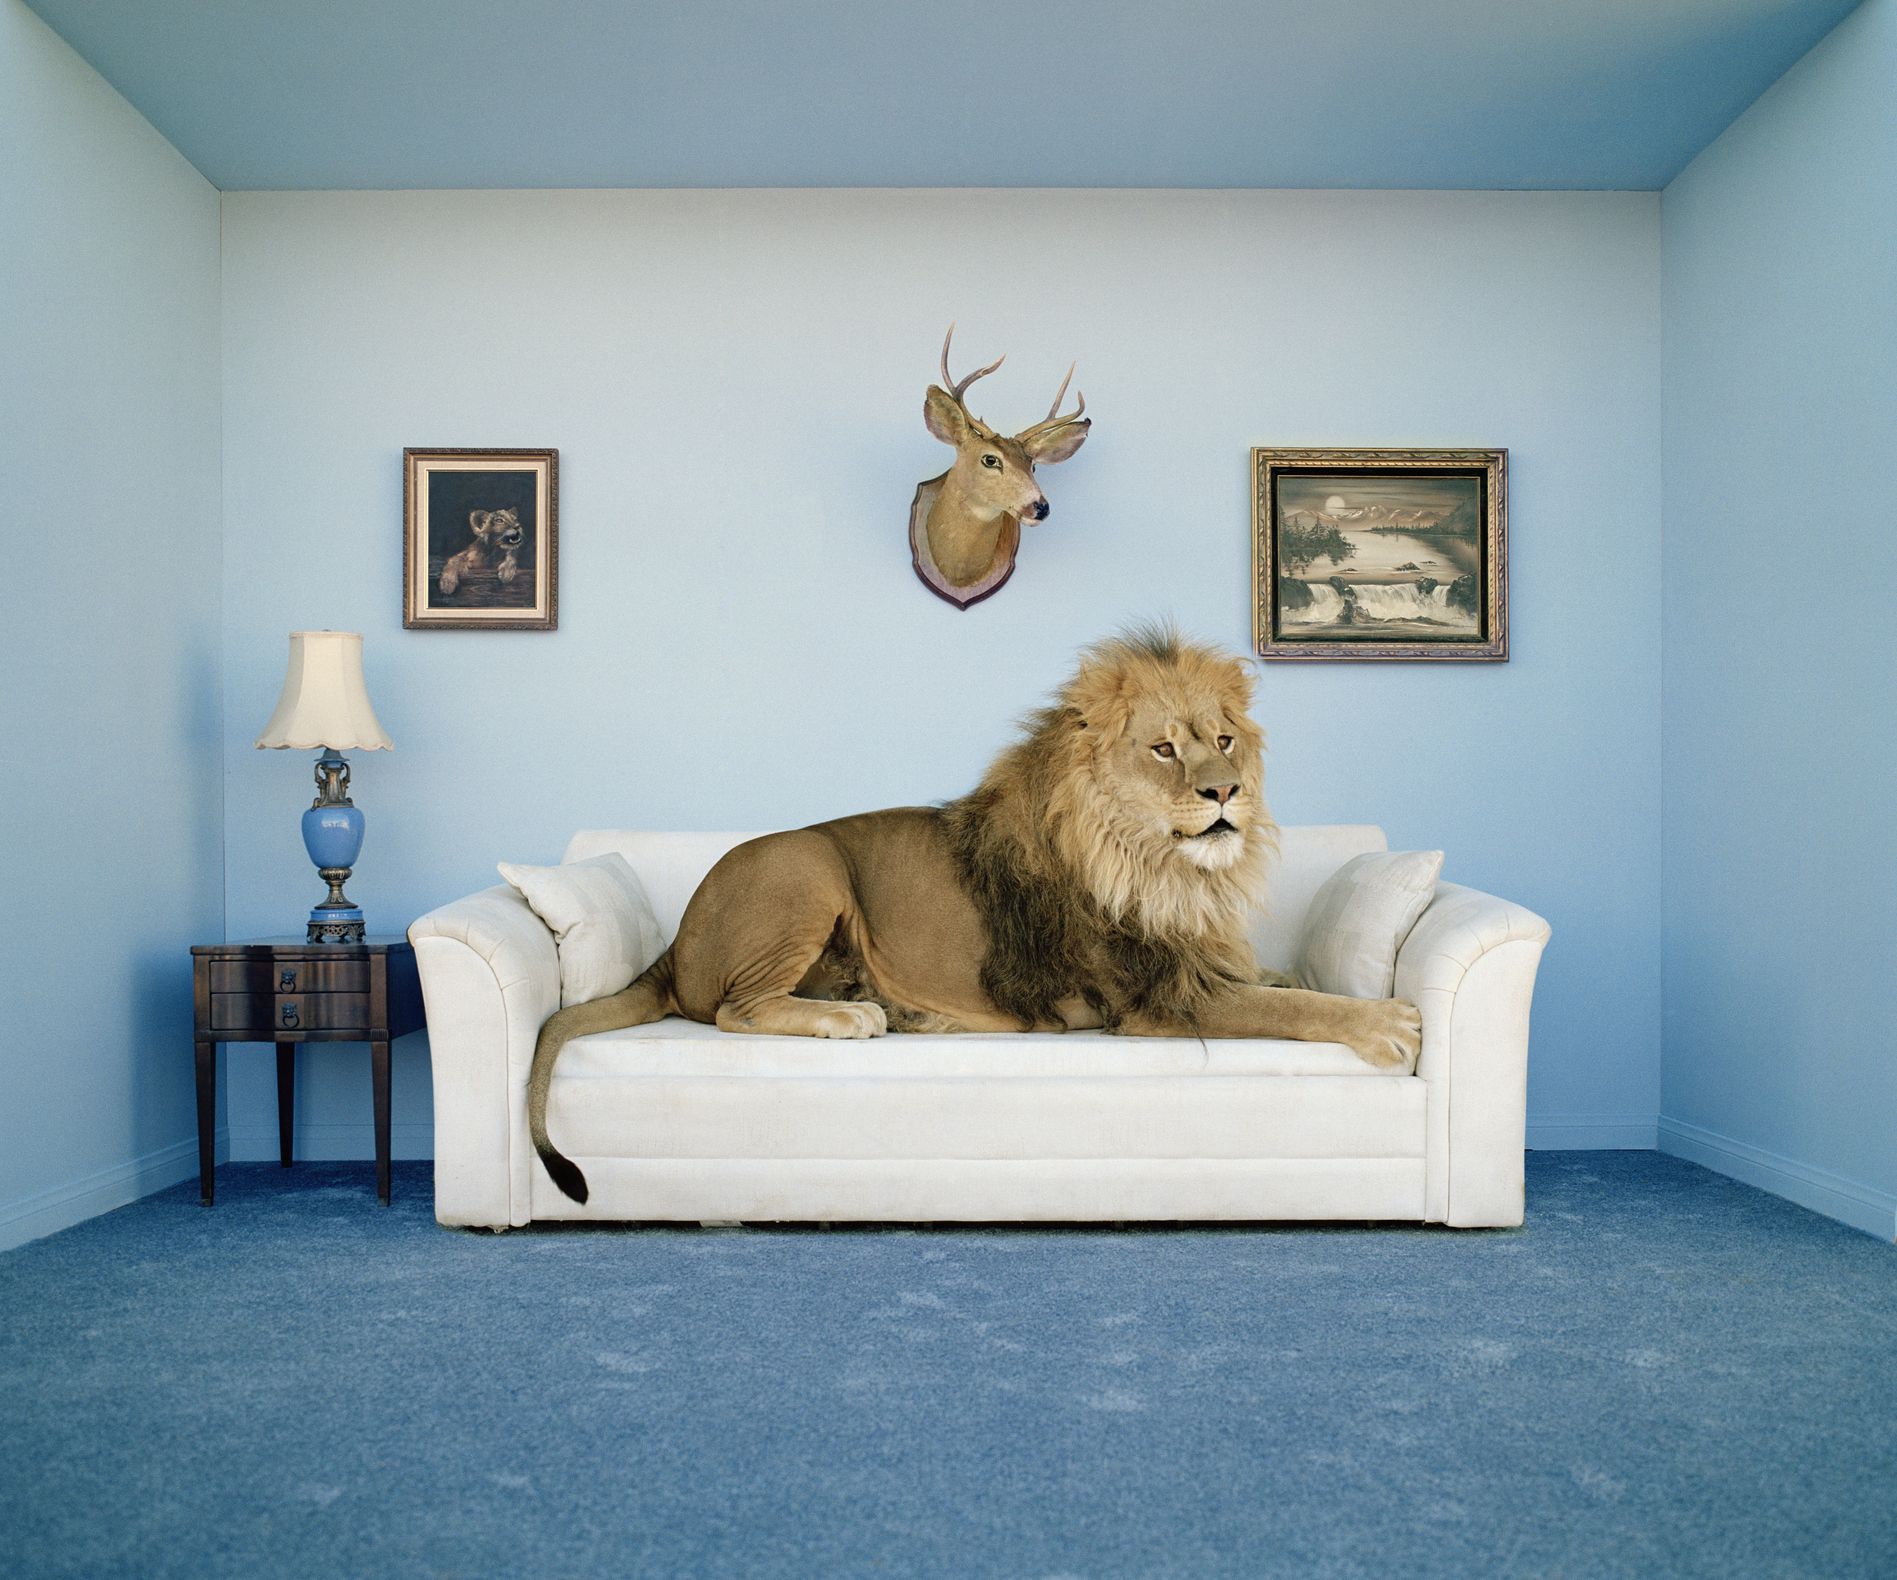 Our Design Favorites of the Week Feature Big Felines and Animal Print